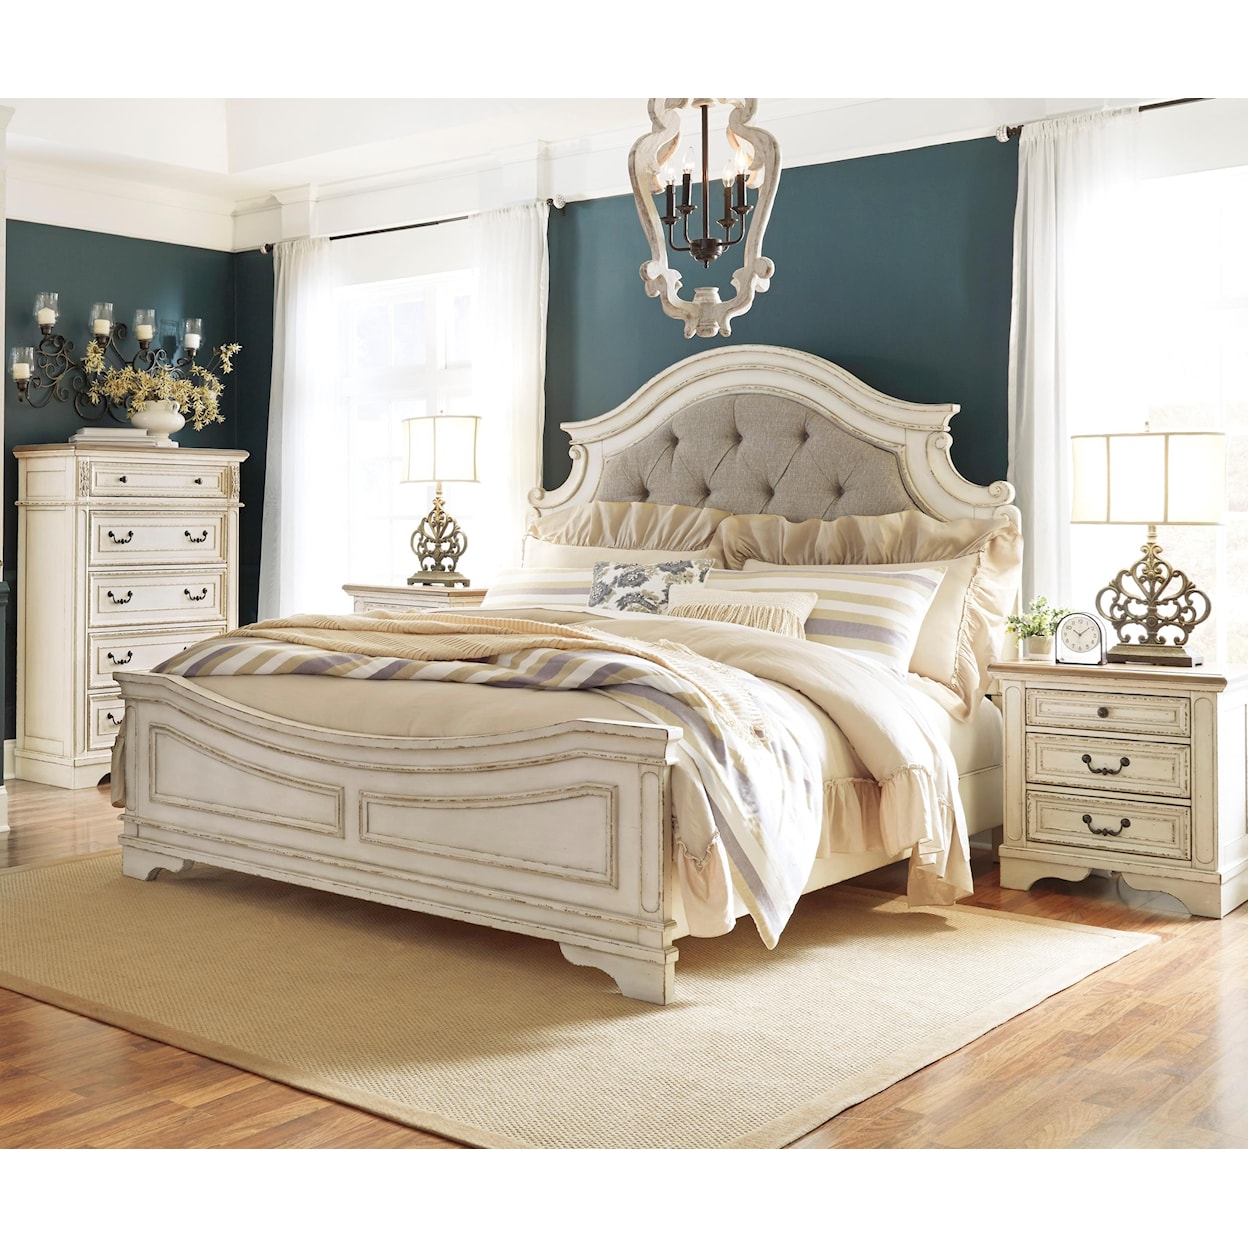 Signature Design by Ashley Realyn 5 Piece King Panel Bedroom Set